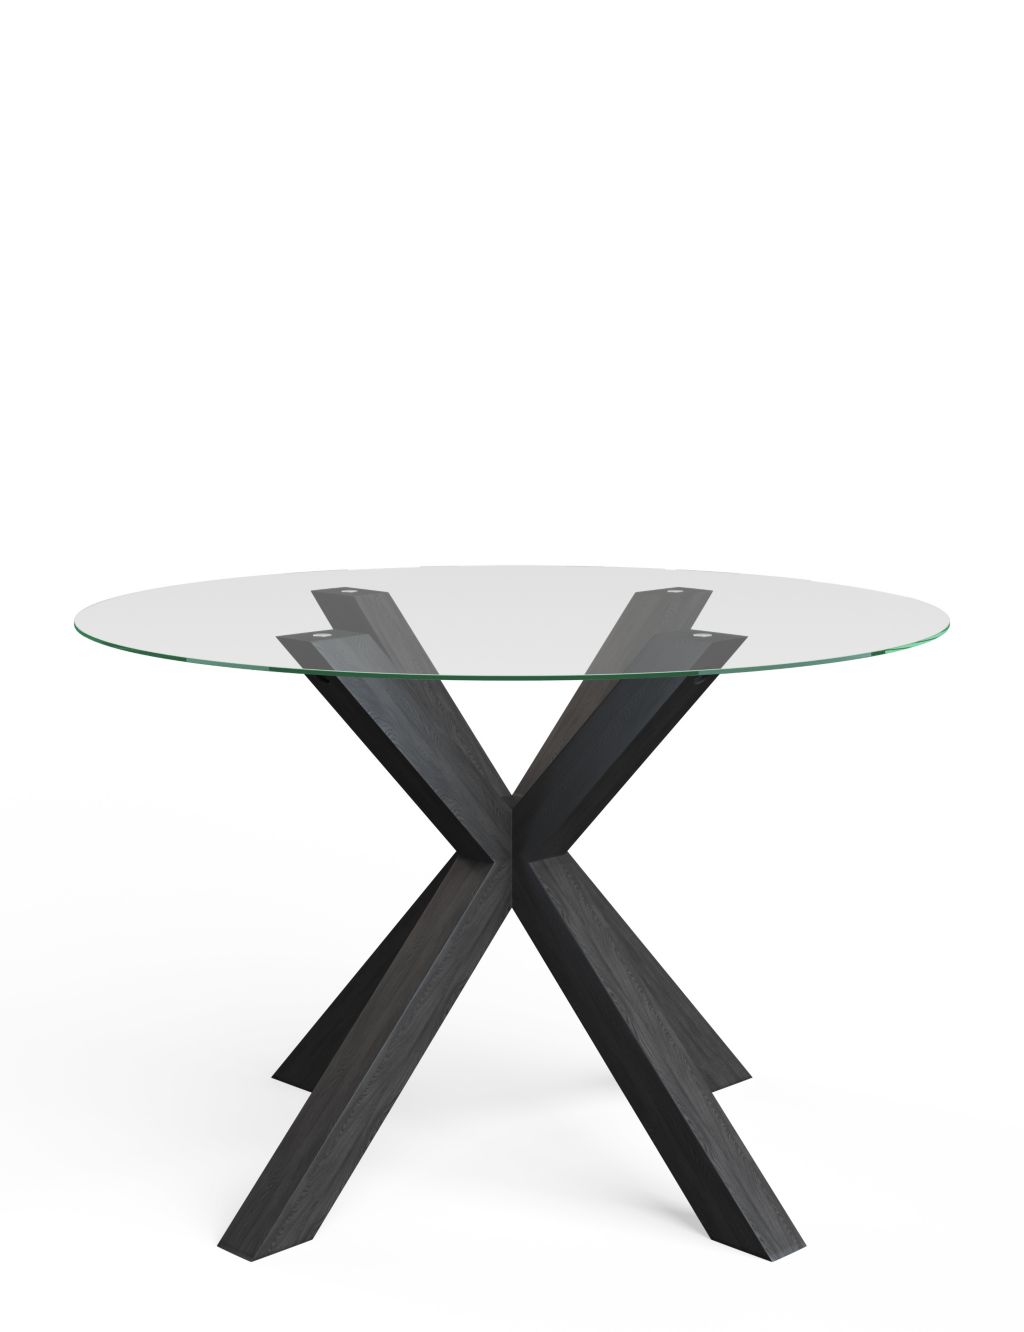 Colby Dark Round Glass 4 Seater Dining Table image 2